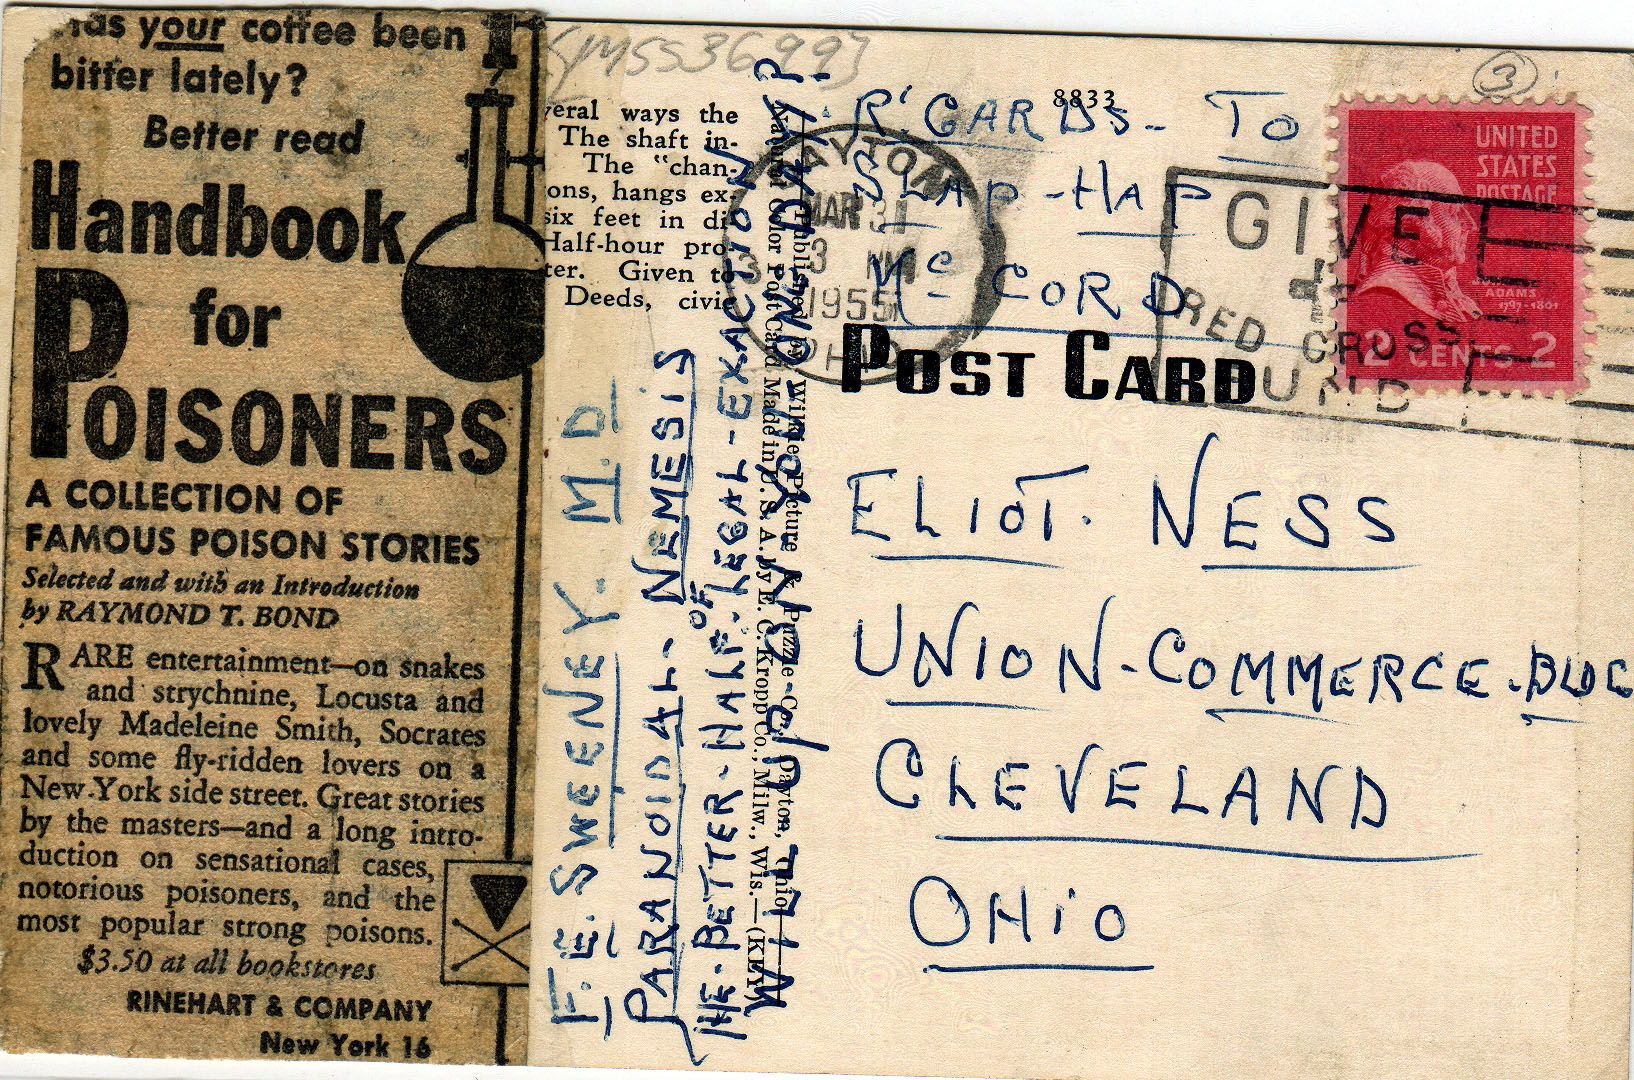 Postcard (4 of 4) sent to Eliot Ness in 1954 by an asylum inmate who some people believe may have been the torso murder. Eliot Ness, Taunt, Cleveland Ohio, Inmates, Crime, Nostalgia, Bullet Journal, Asylum, Reading